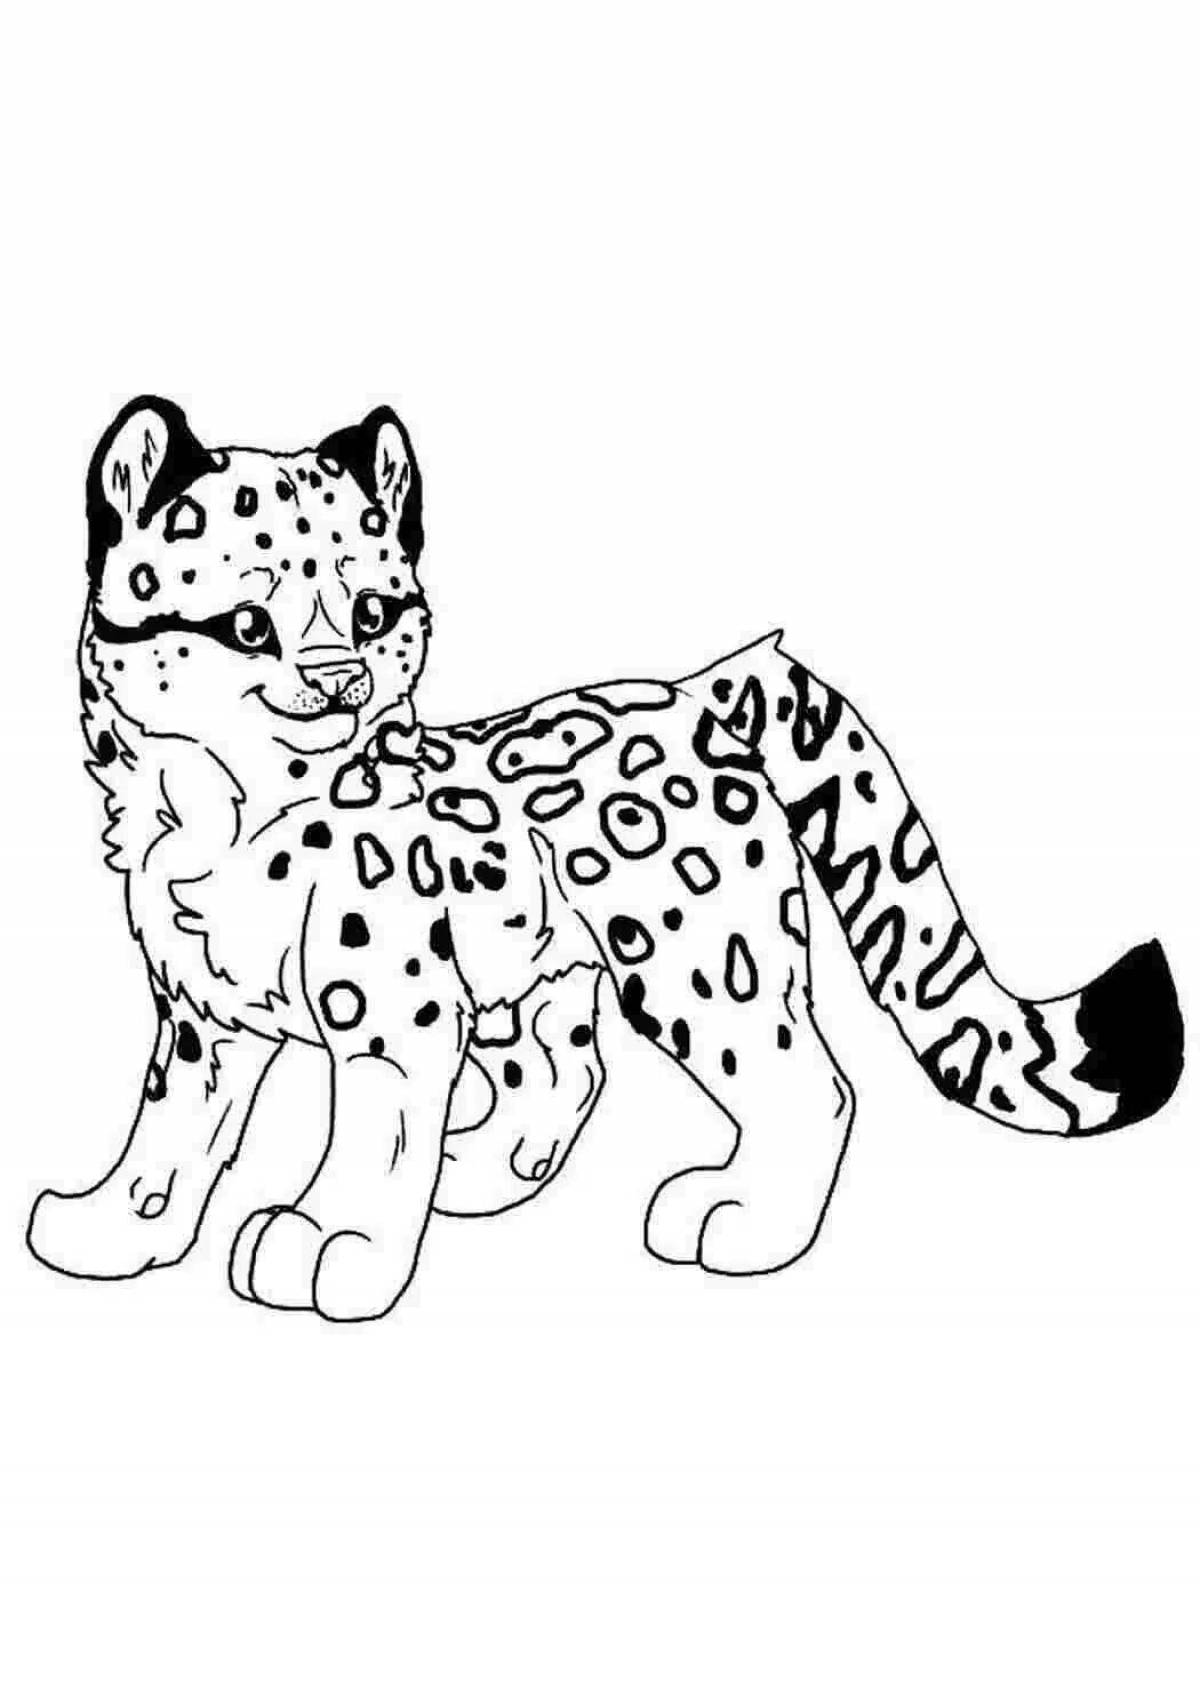 Magic leopard coloring book for children 5-6 years old